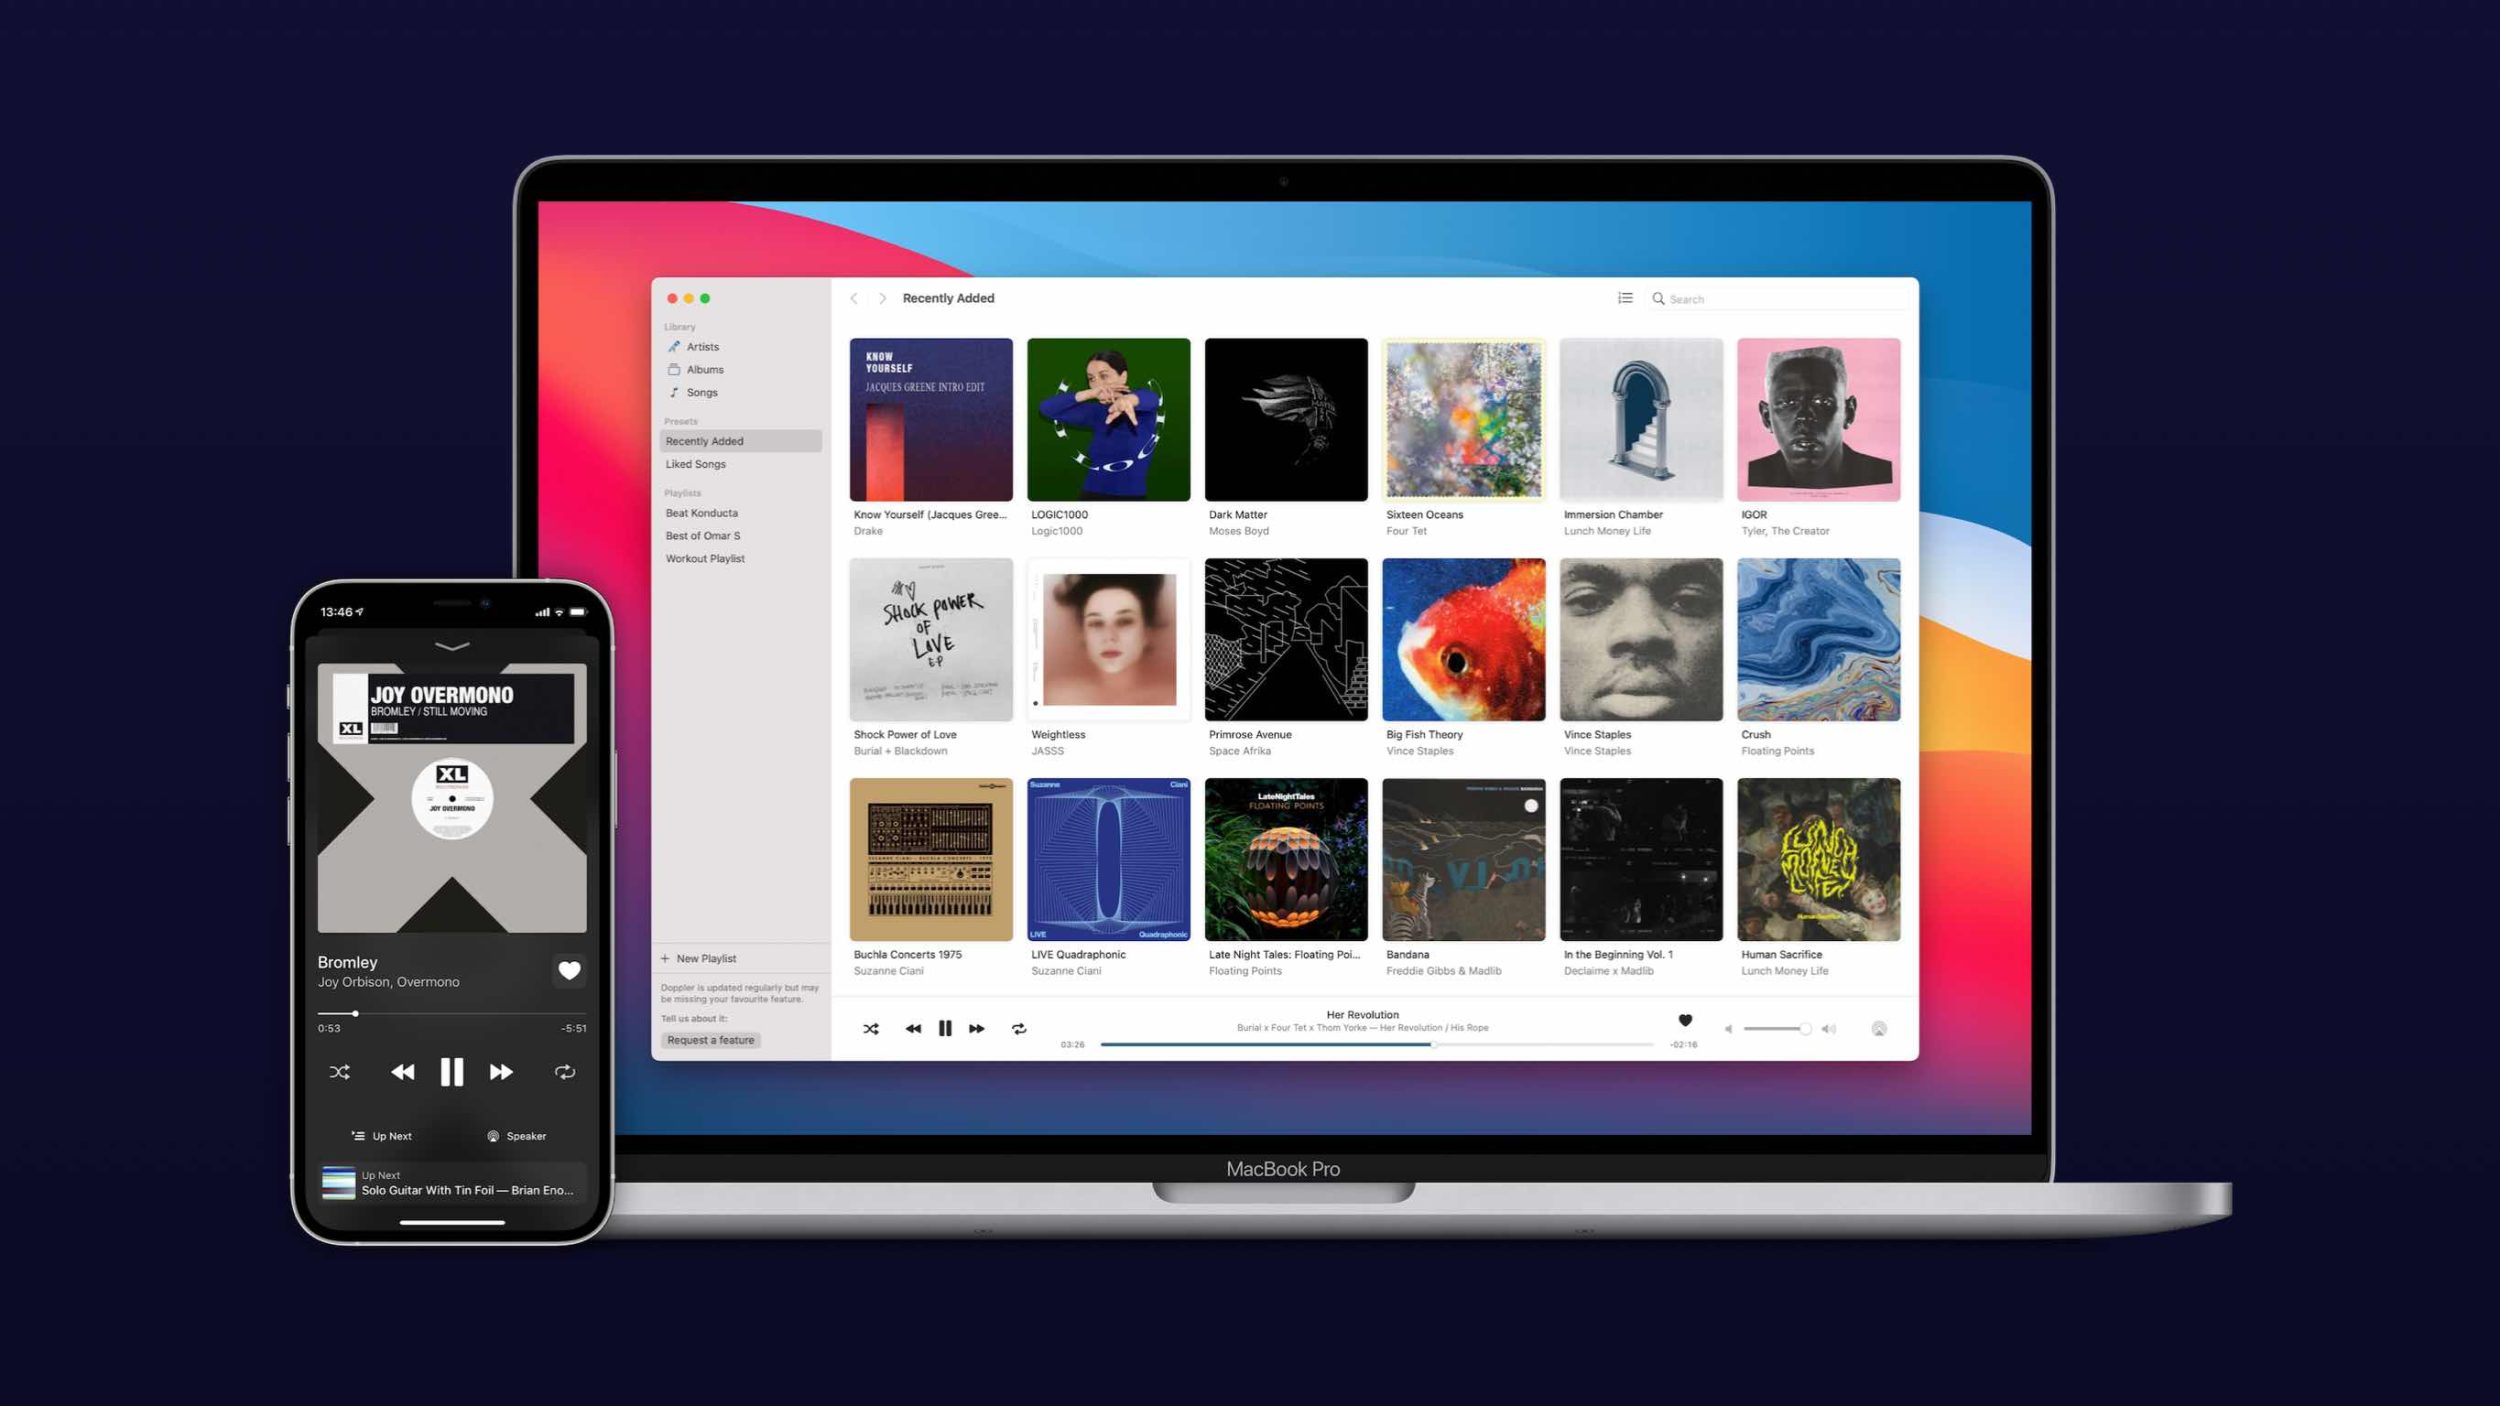 Doppler HiFi music player launches for Mac with iOS integration